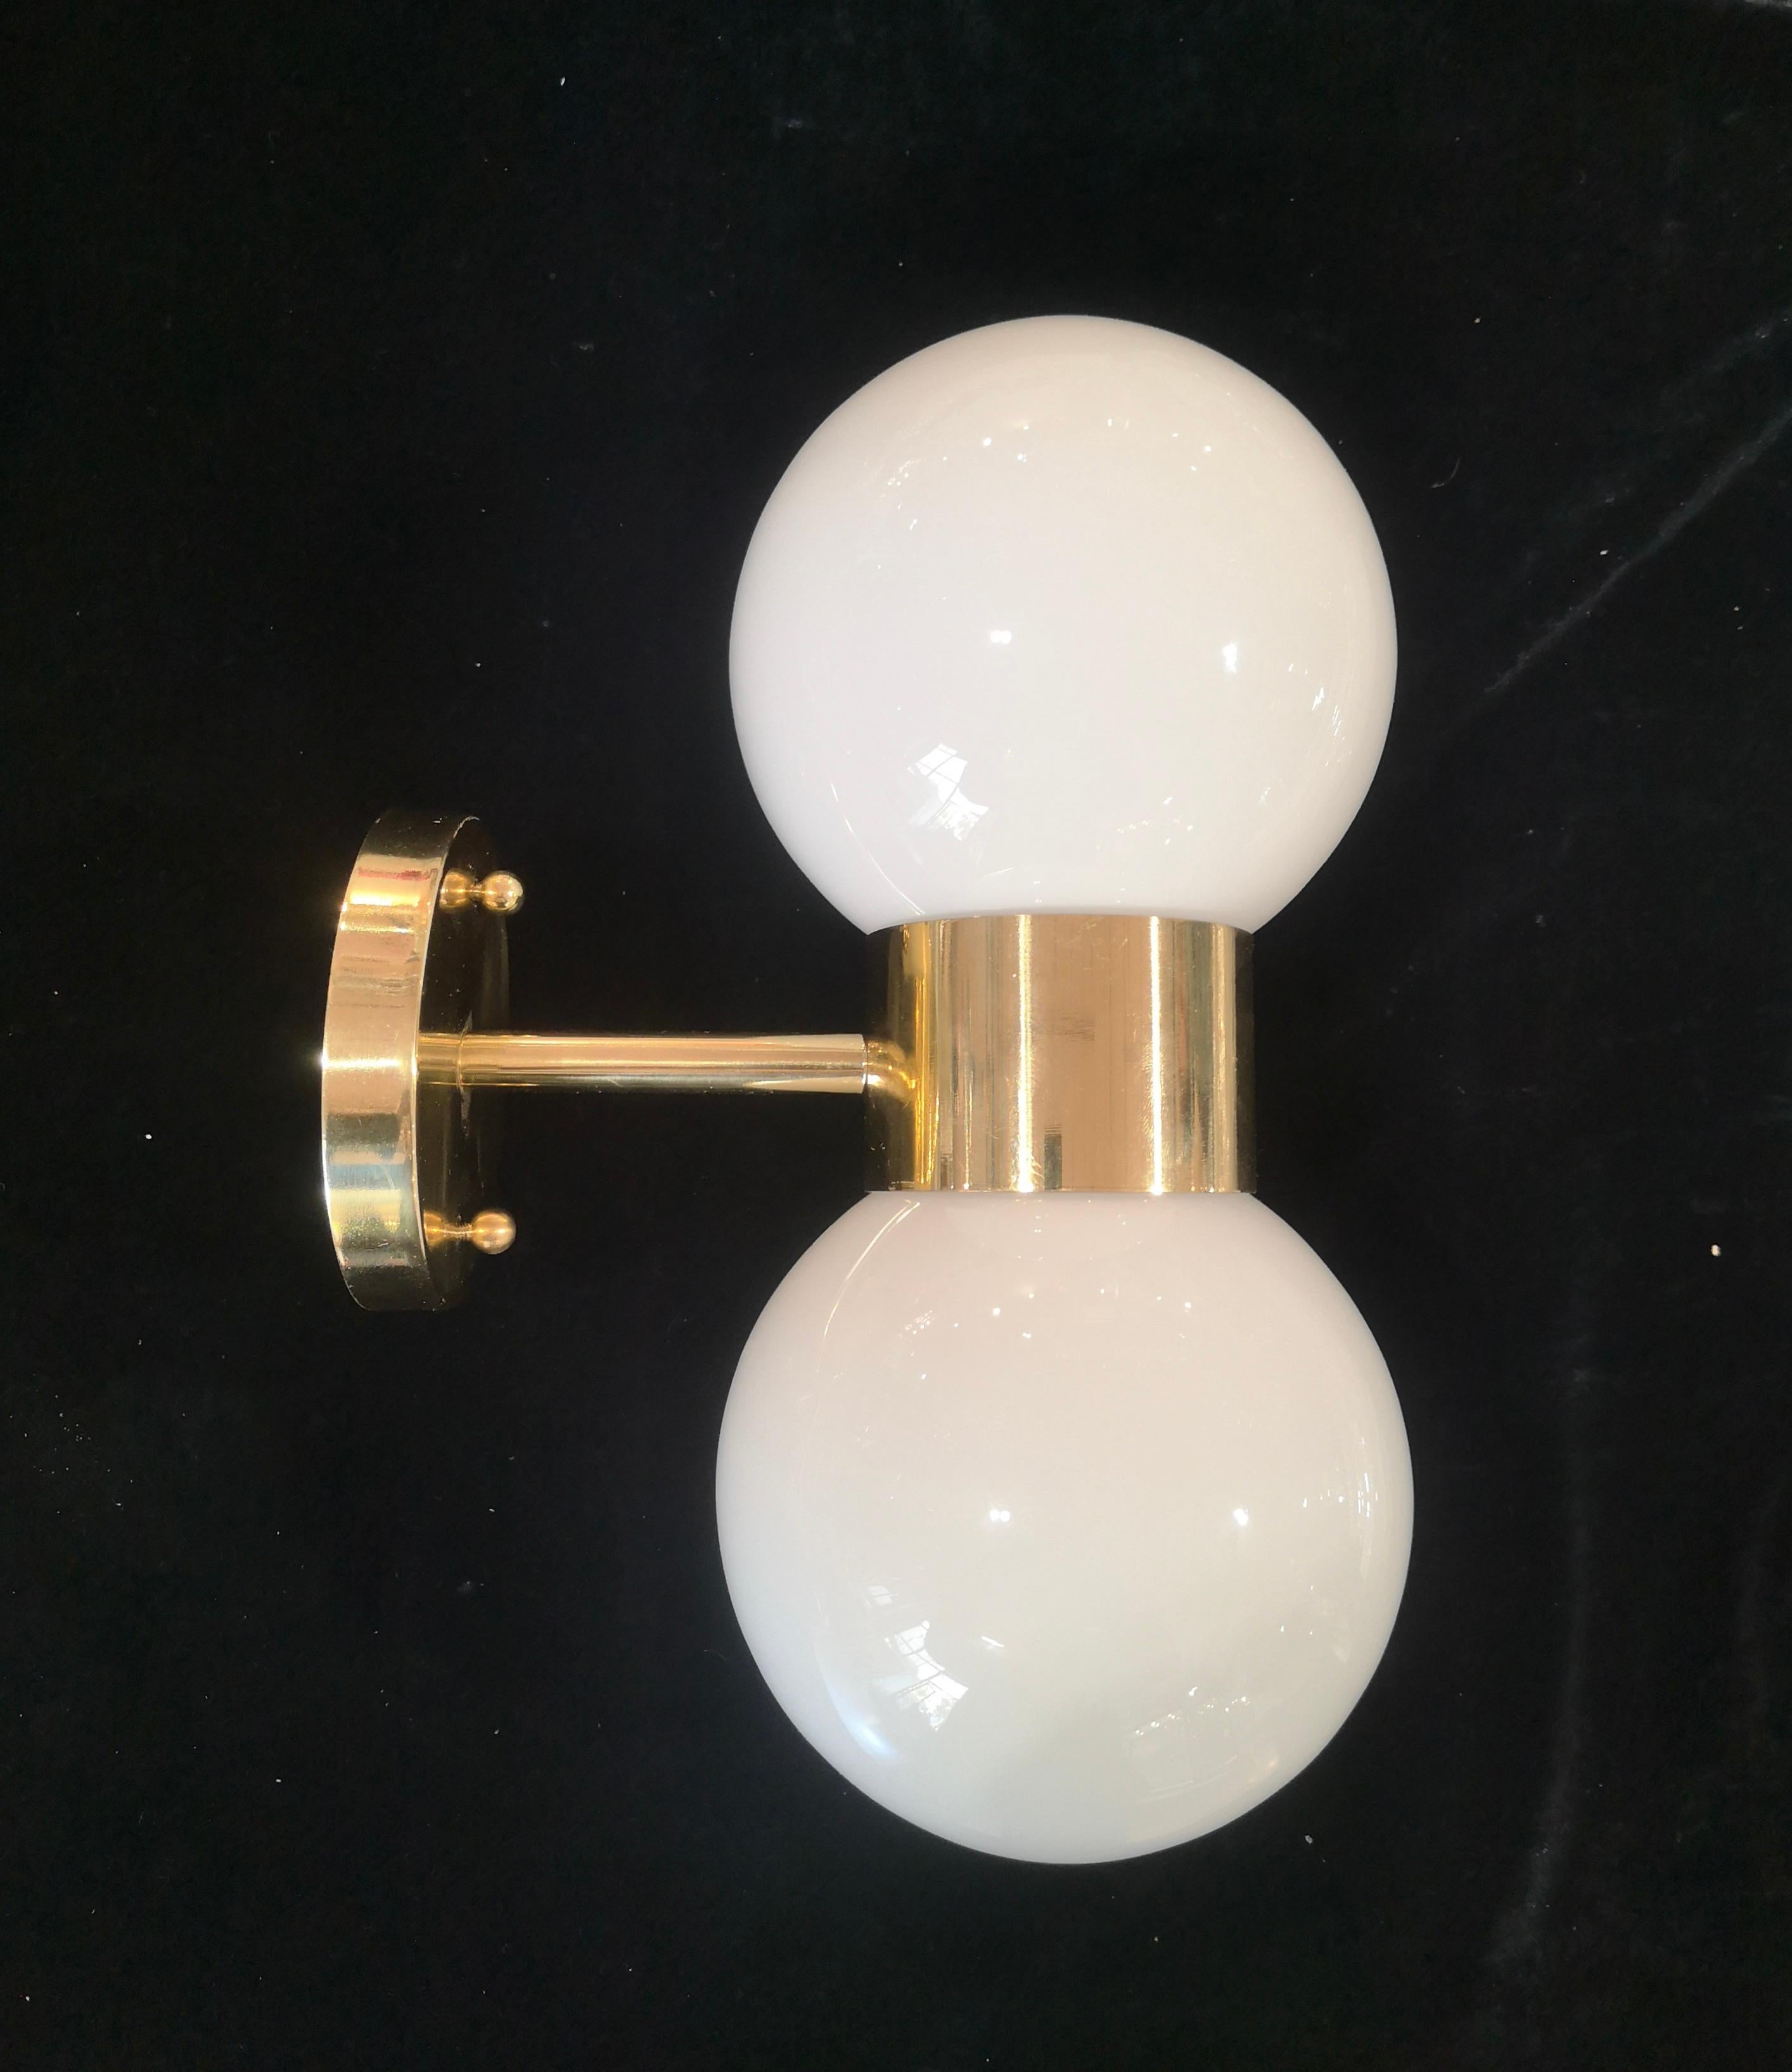 Refined and delicate design for this wall light with white Murano glass.

The applique is formed by a brass structure that allows the superimposed housing of two beautiful white Murano glass spheres. The design is very clean and simple, but at the